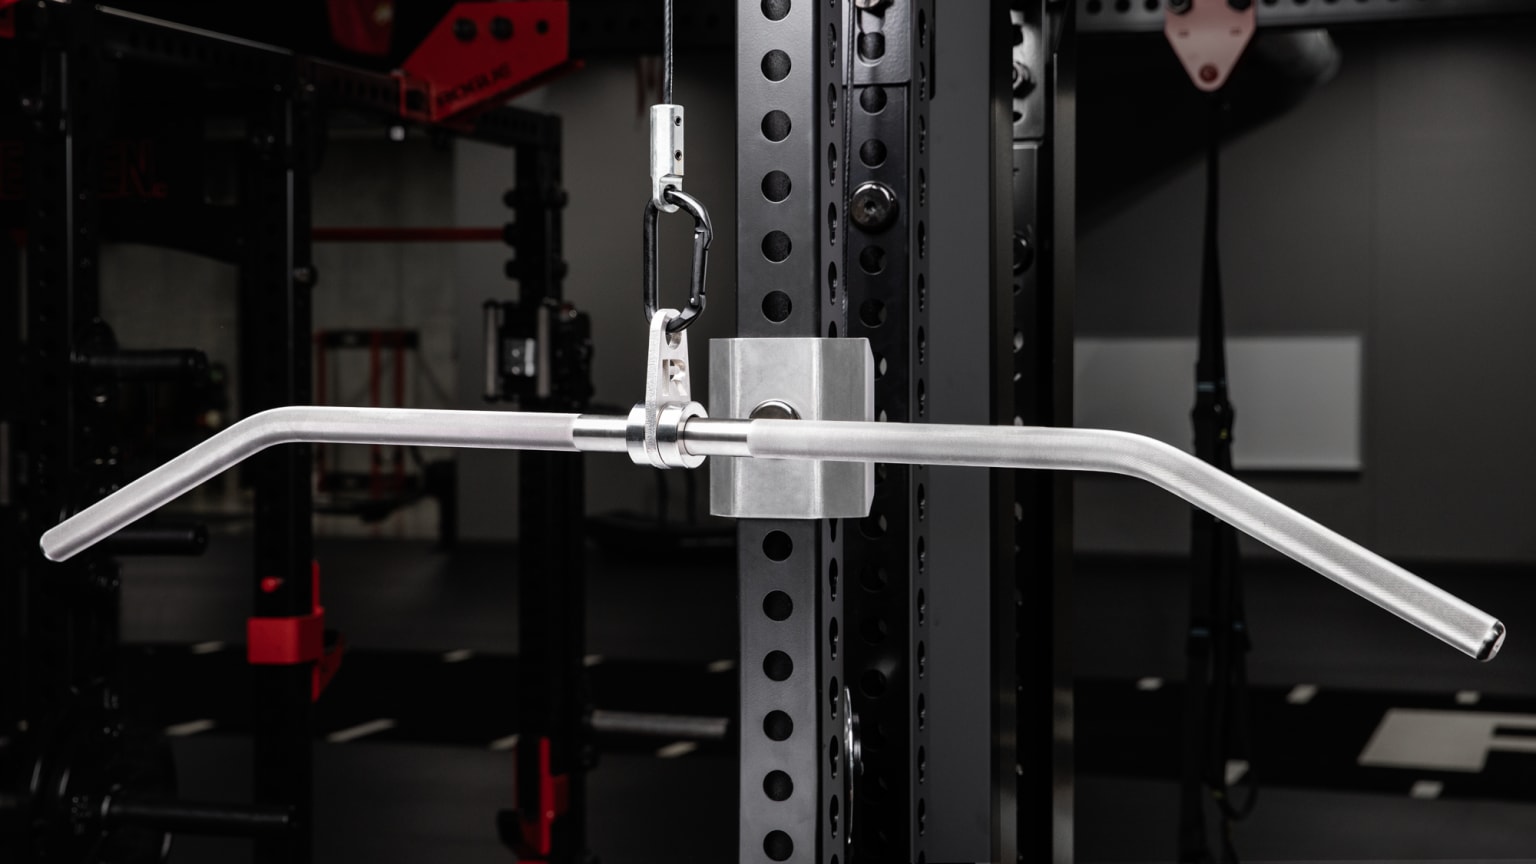 How To Use The Lat Pulldown Machine For Best Results - Steel